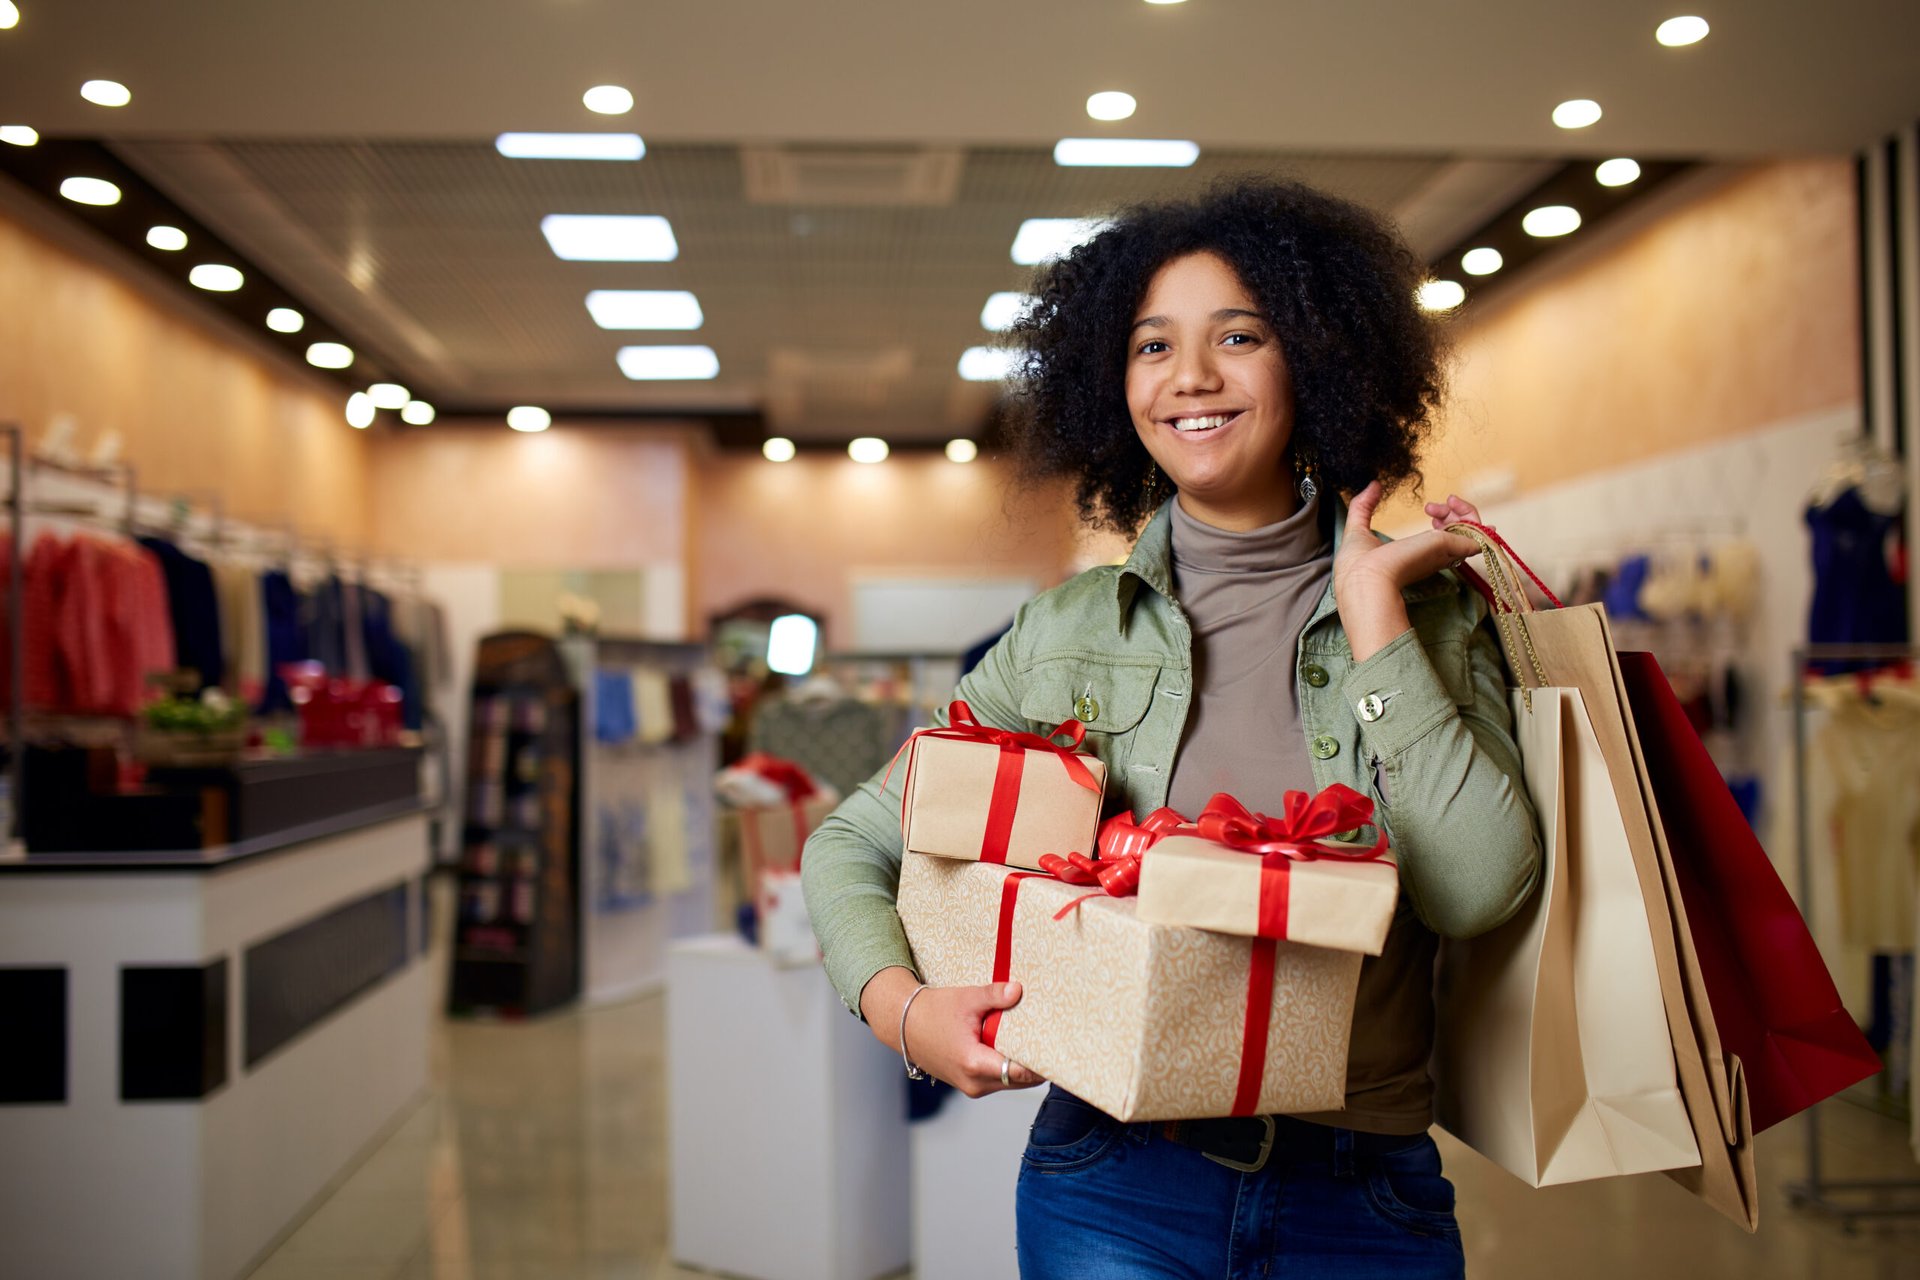 Woman with holiday gifts and shopping bags at a mall